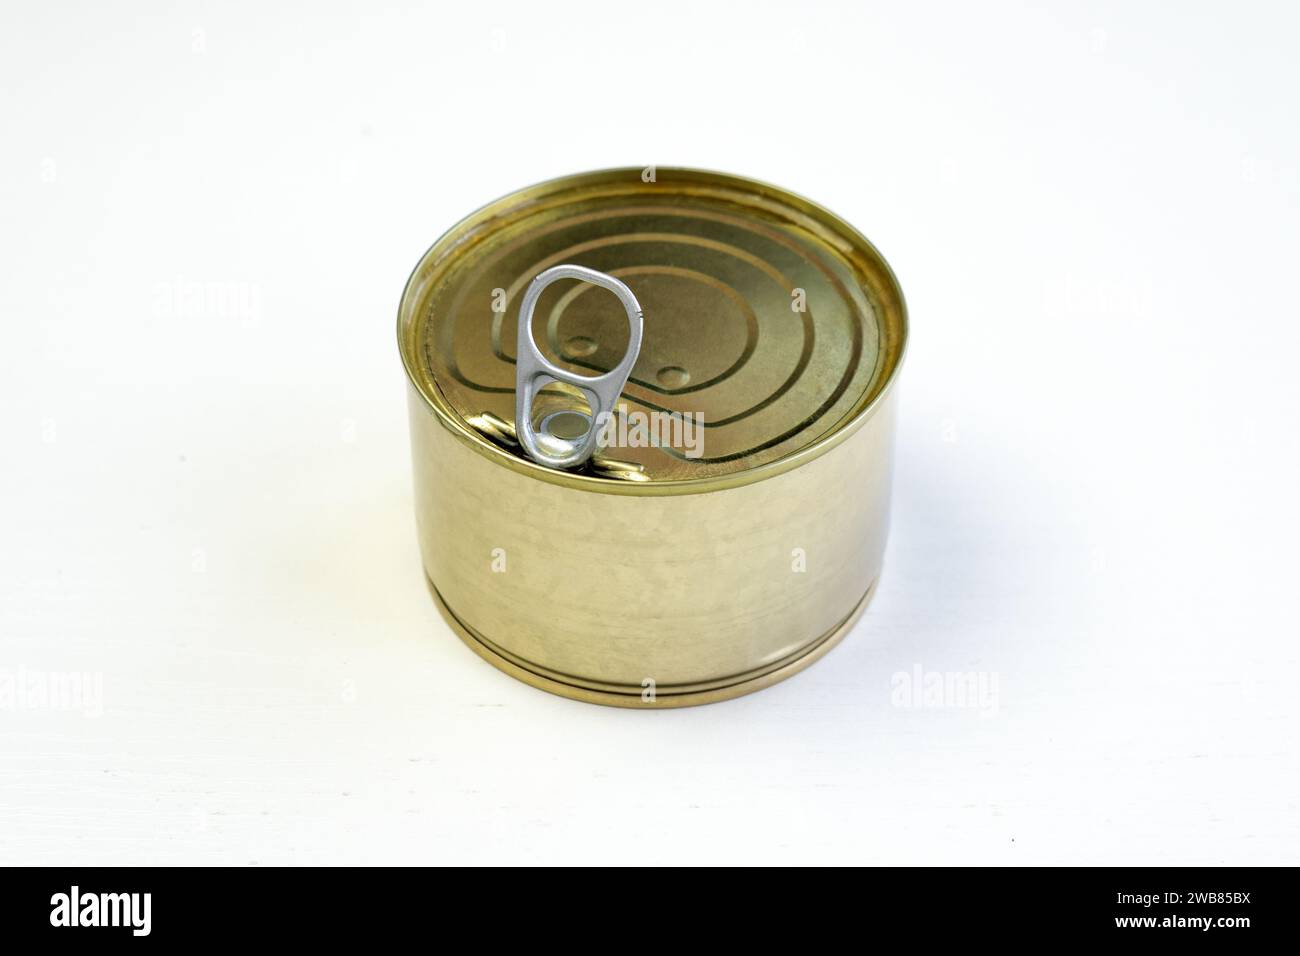 Unlabeled canned tuna on white background. A blank mockup tin-coated steel tuna can with open lid on white table. Canned fish steak and preserved food Stock Photo